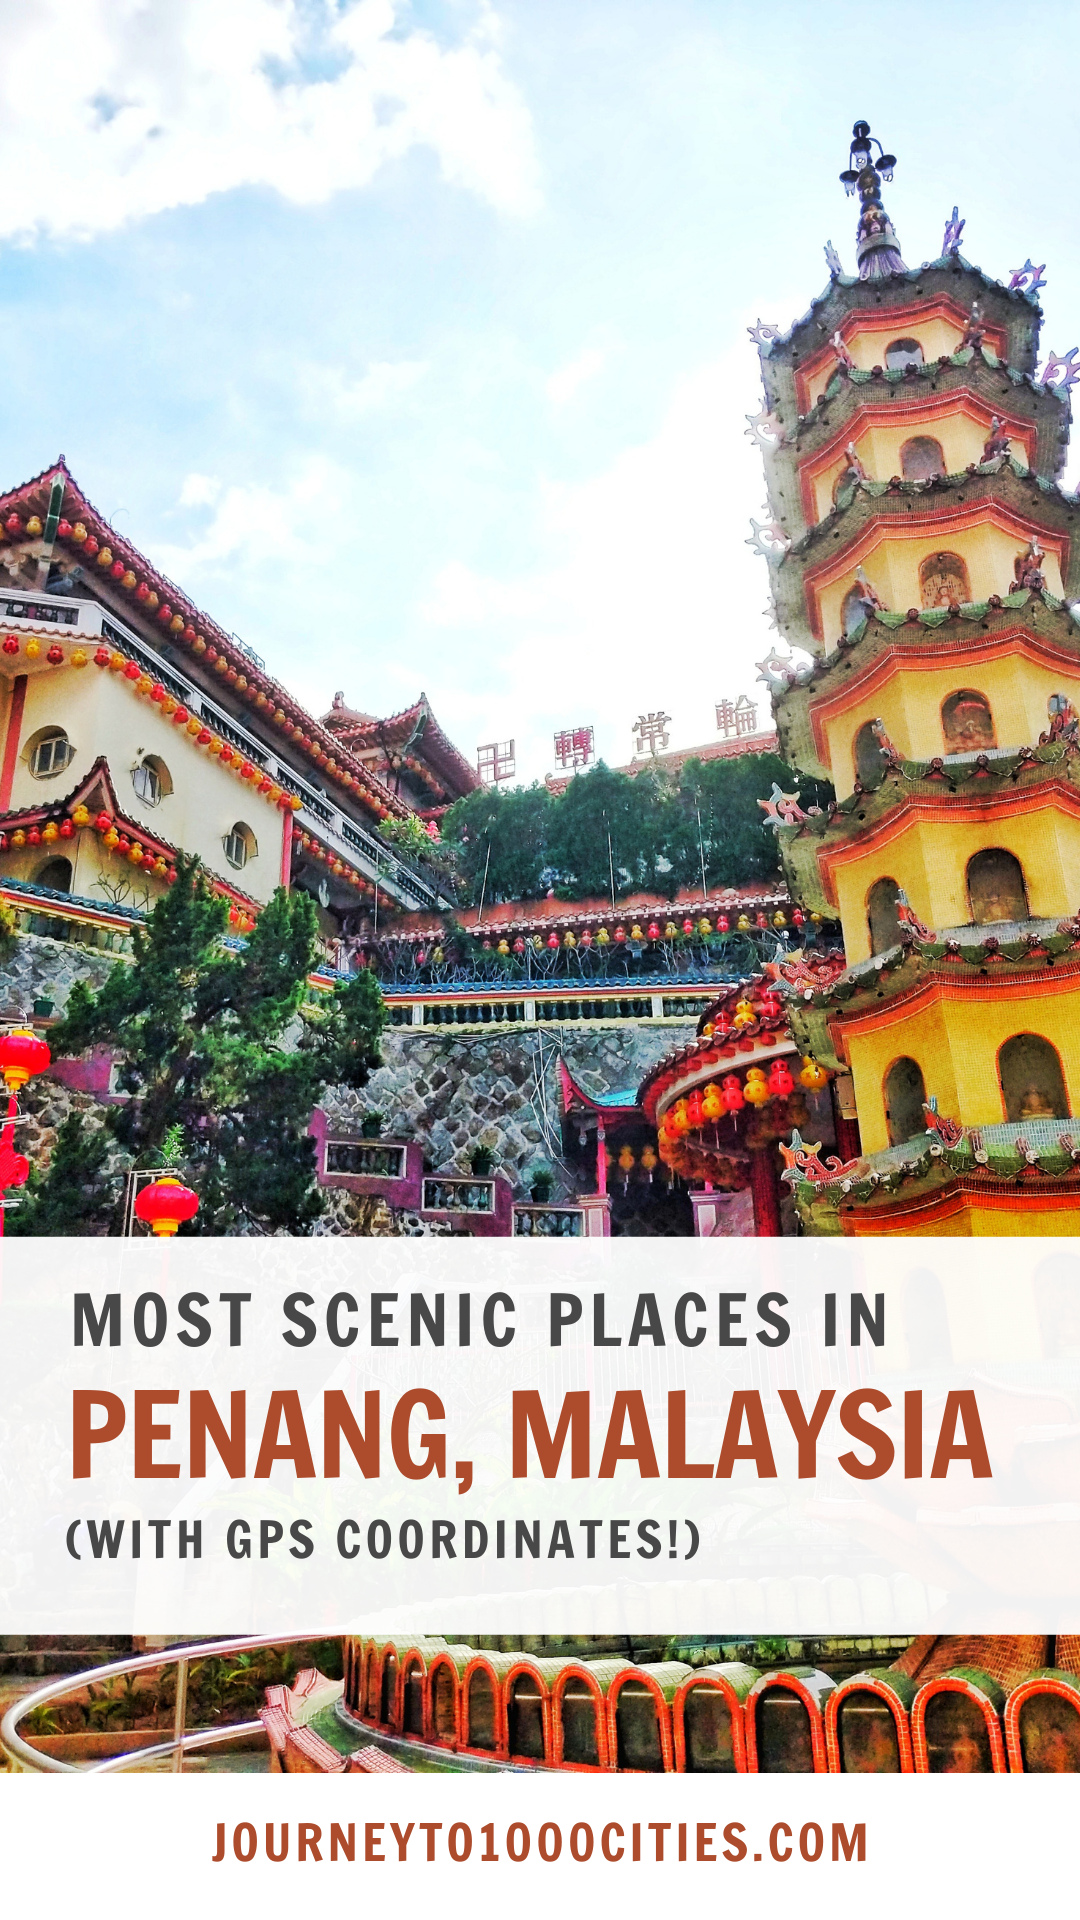 Most Instagrammable Spots in Penang, Malaysia